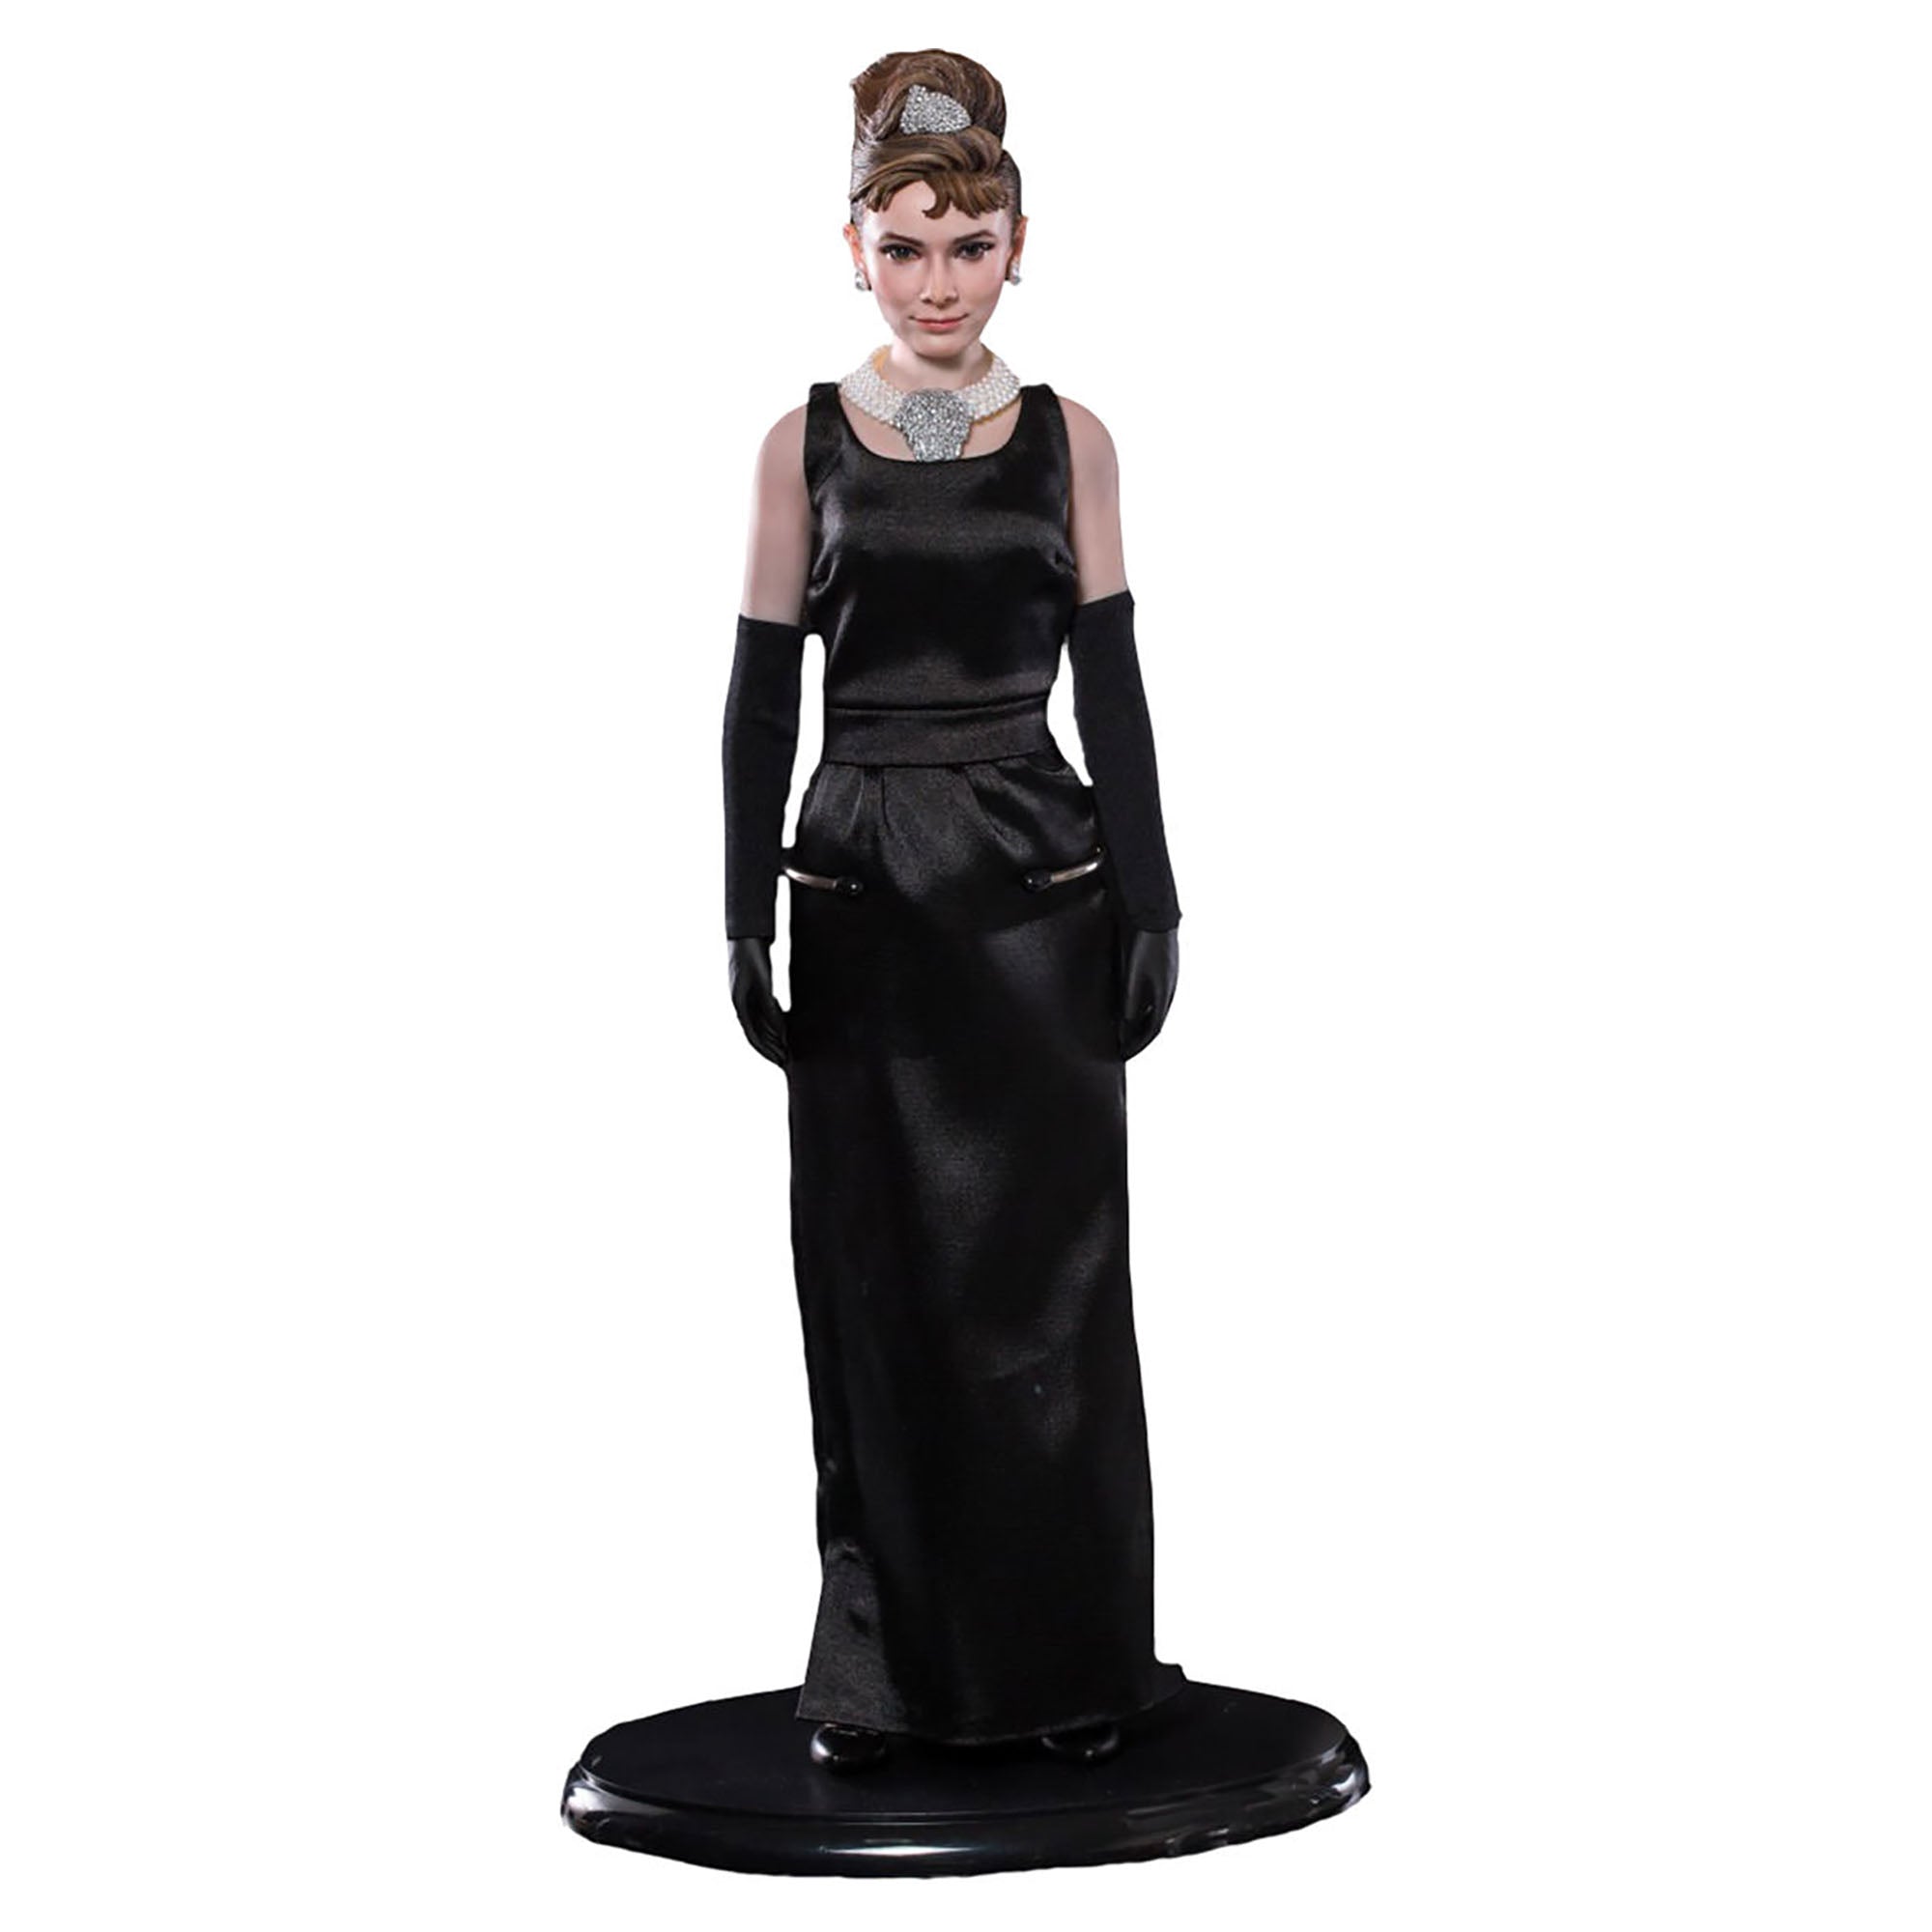 Star Ace Toys Breakfast at Tiffany's - Audrey Hepburn as Holly Golightly 1/6th Scale Collectible Figure